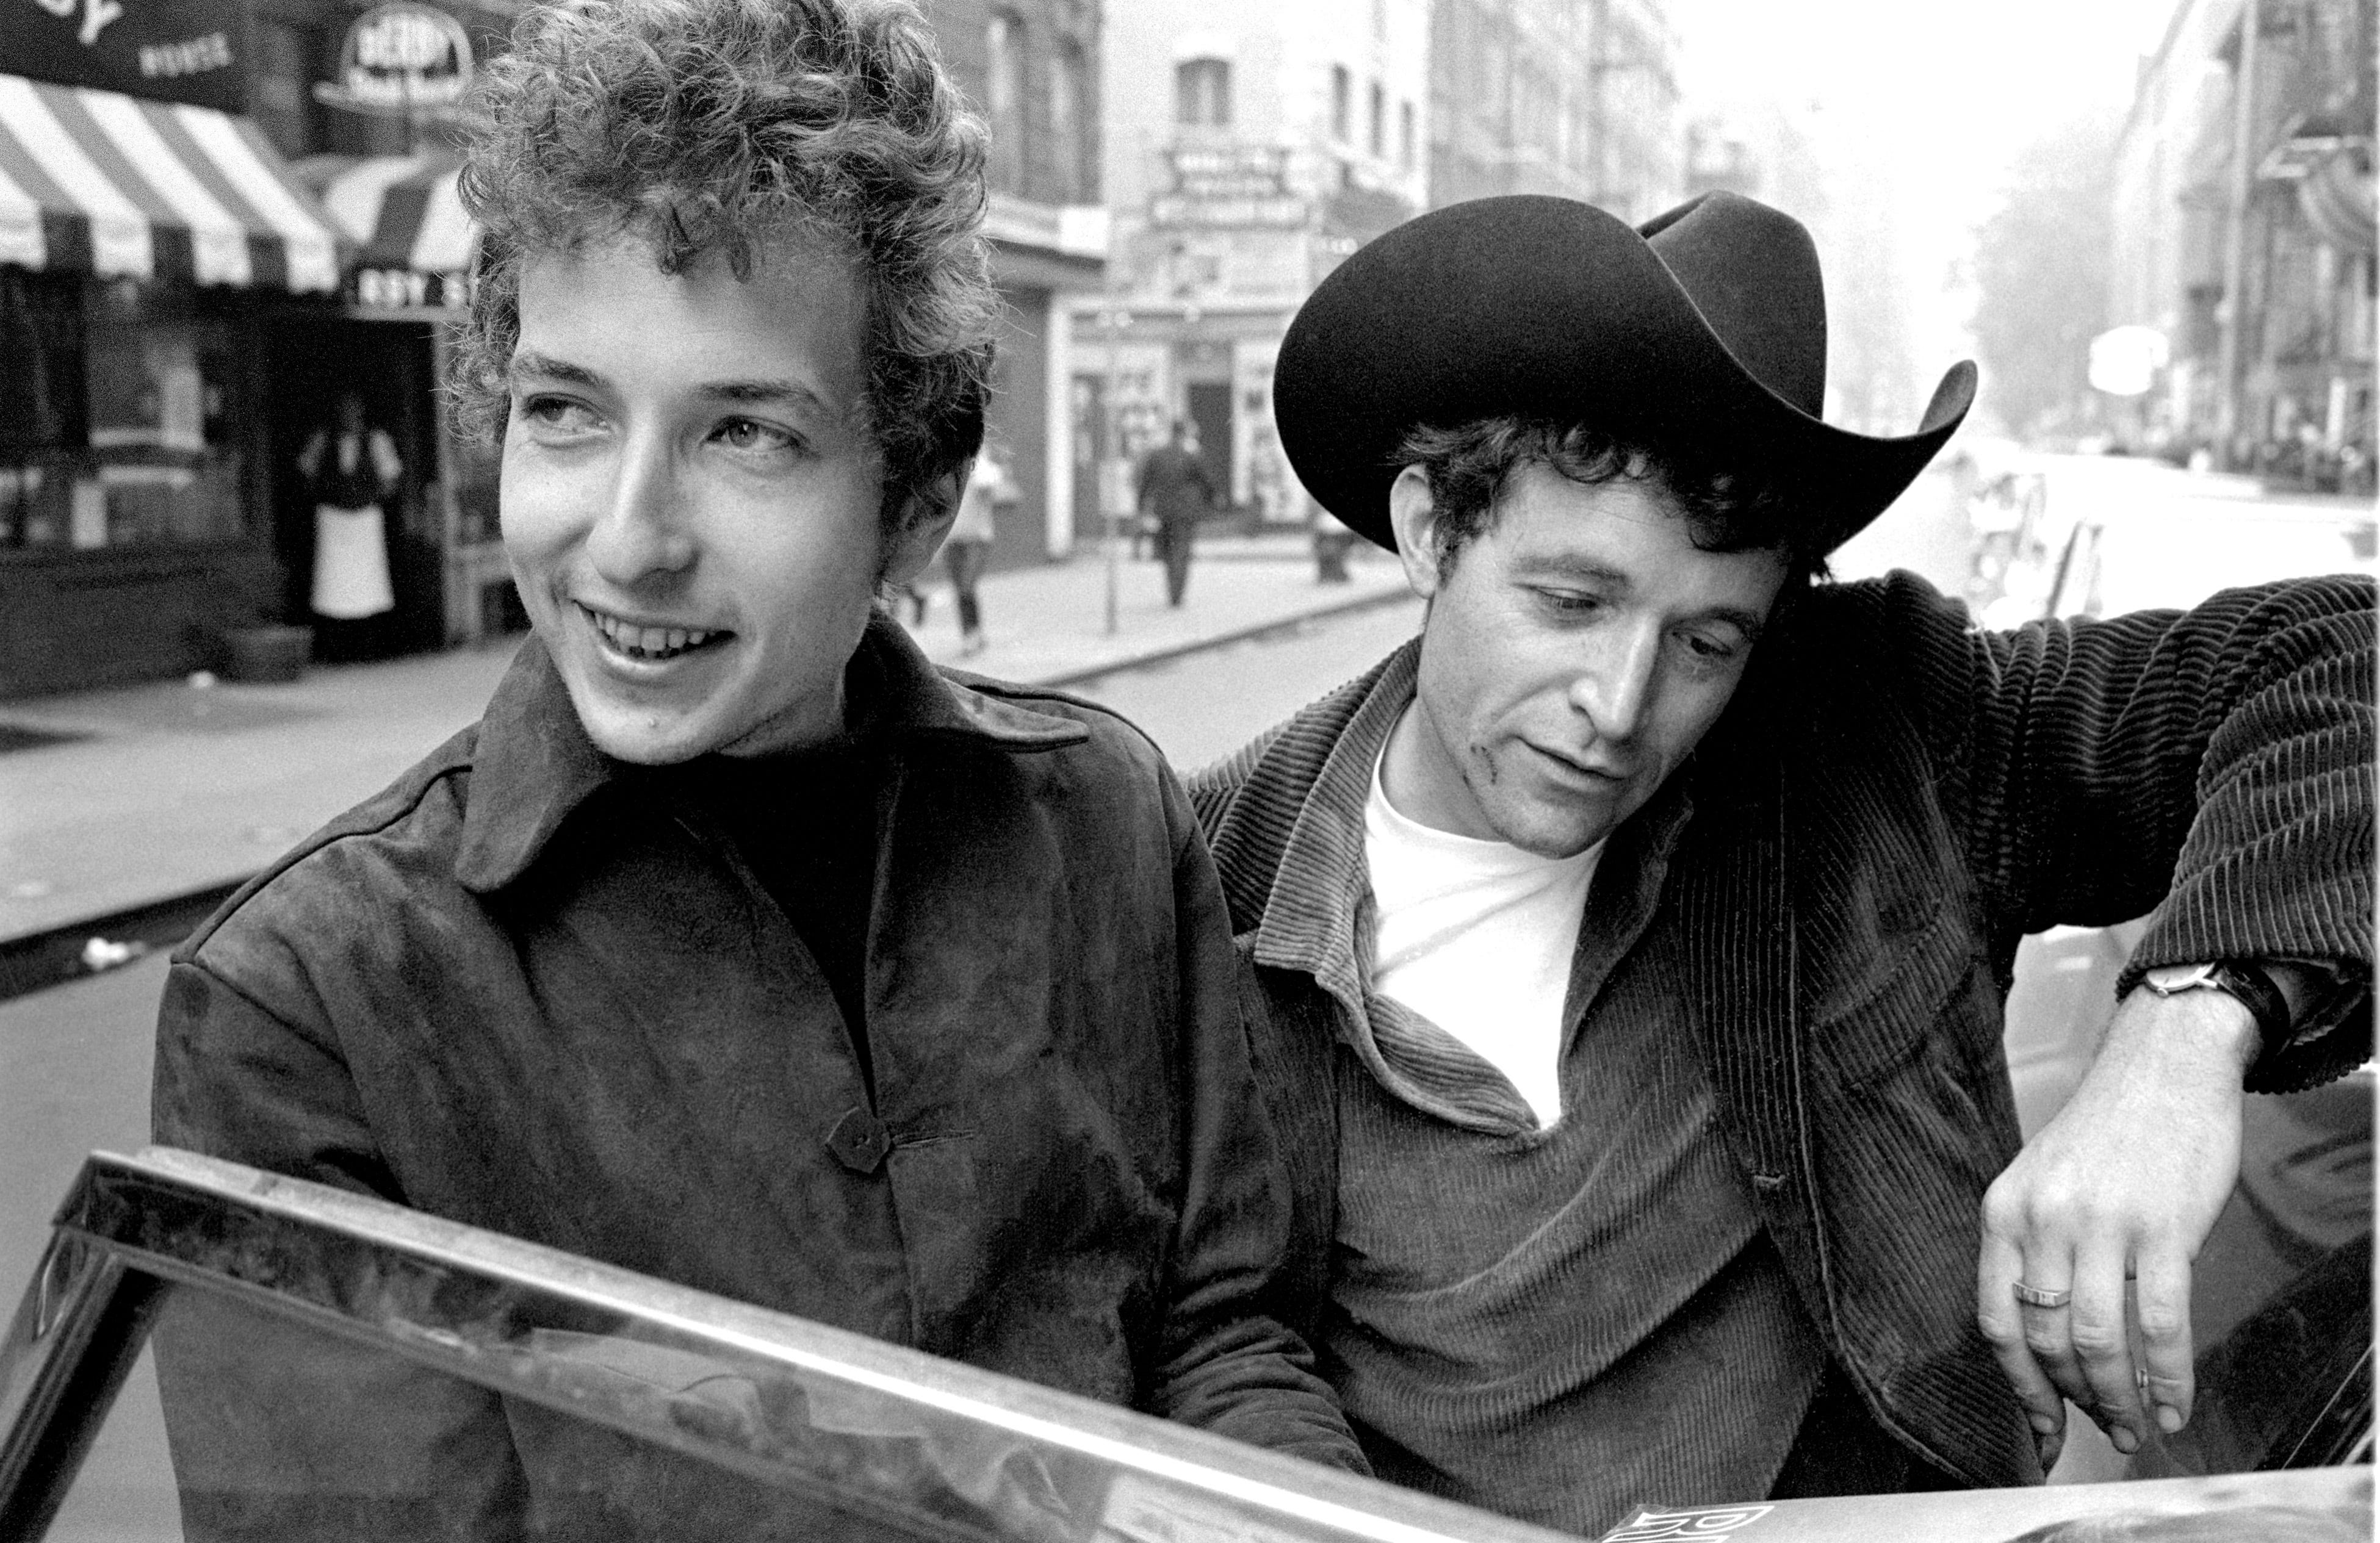 Photographer Douglas R. Gilbert captured this candid image of a young Bob Dylan and Ramblin' Jack Elliot in Greenwich Village, New York in 1964. Gilbert photographed Bob Dylan for LOOK magazine in 1964, spending time with him at his home in Woodstock, New York, in Greenwich Village, and at the Newport Folk Festival.  After reviewing the proposed layout, the editors of LOOK declared Dylan to be “too scruffy for a family magazine” and killed the story.